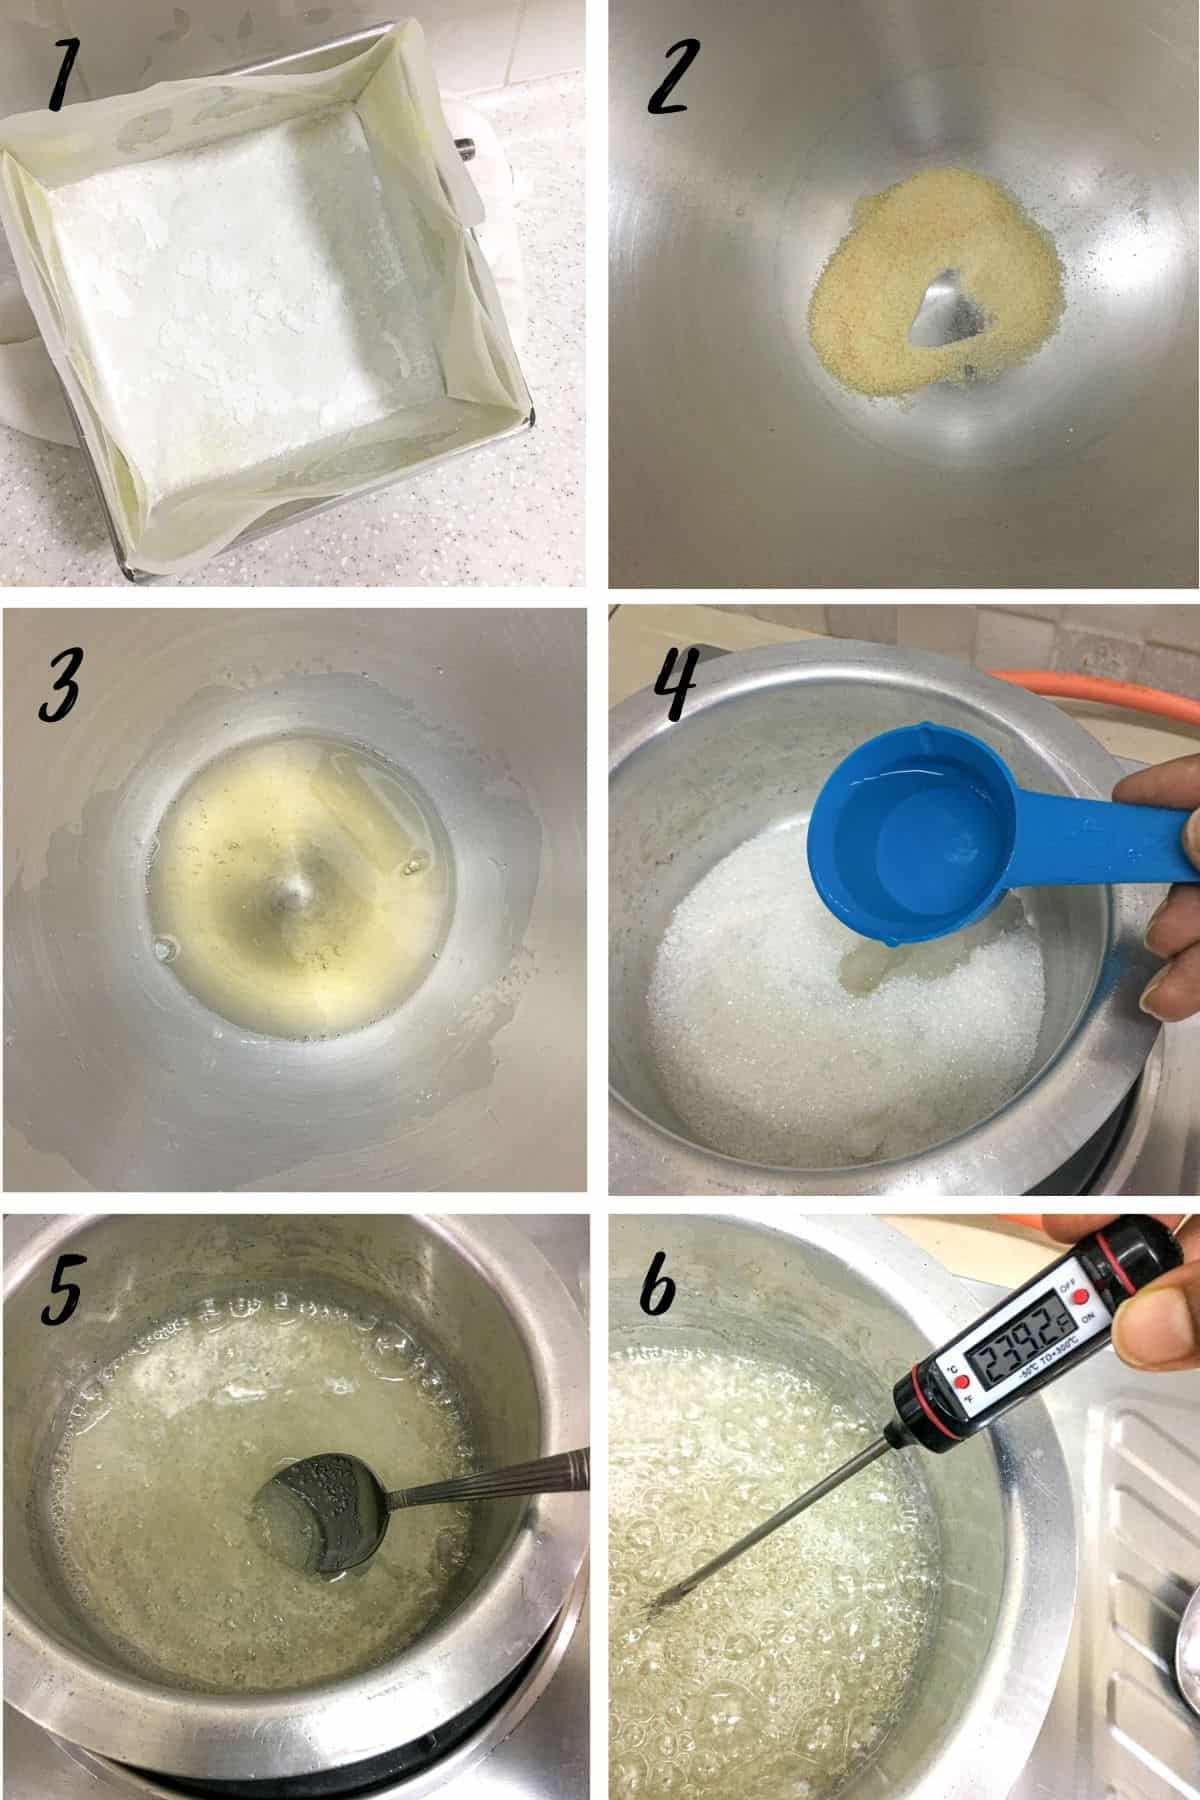 A poster of 6 images showing how to prepare a tin for marshmallows, how to dissolve gelatin, and how to boil sugar to a soft ball stage